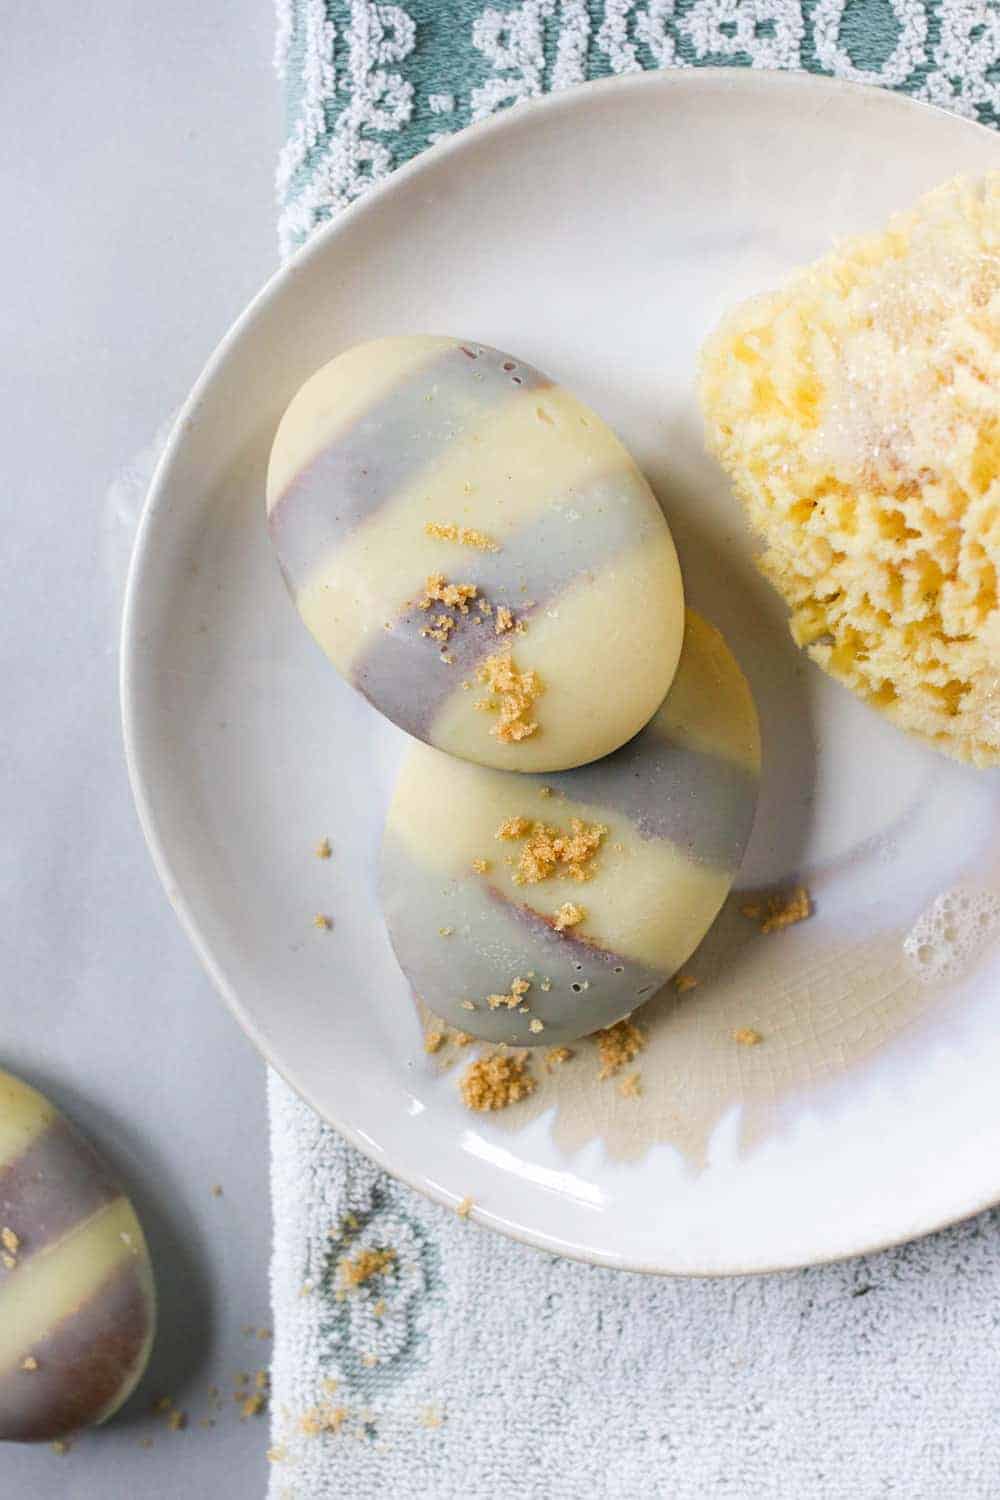 Got Dry Skin? These DIY Sugar Scrub Bars Are Just What You Need!